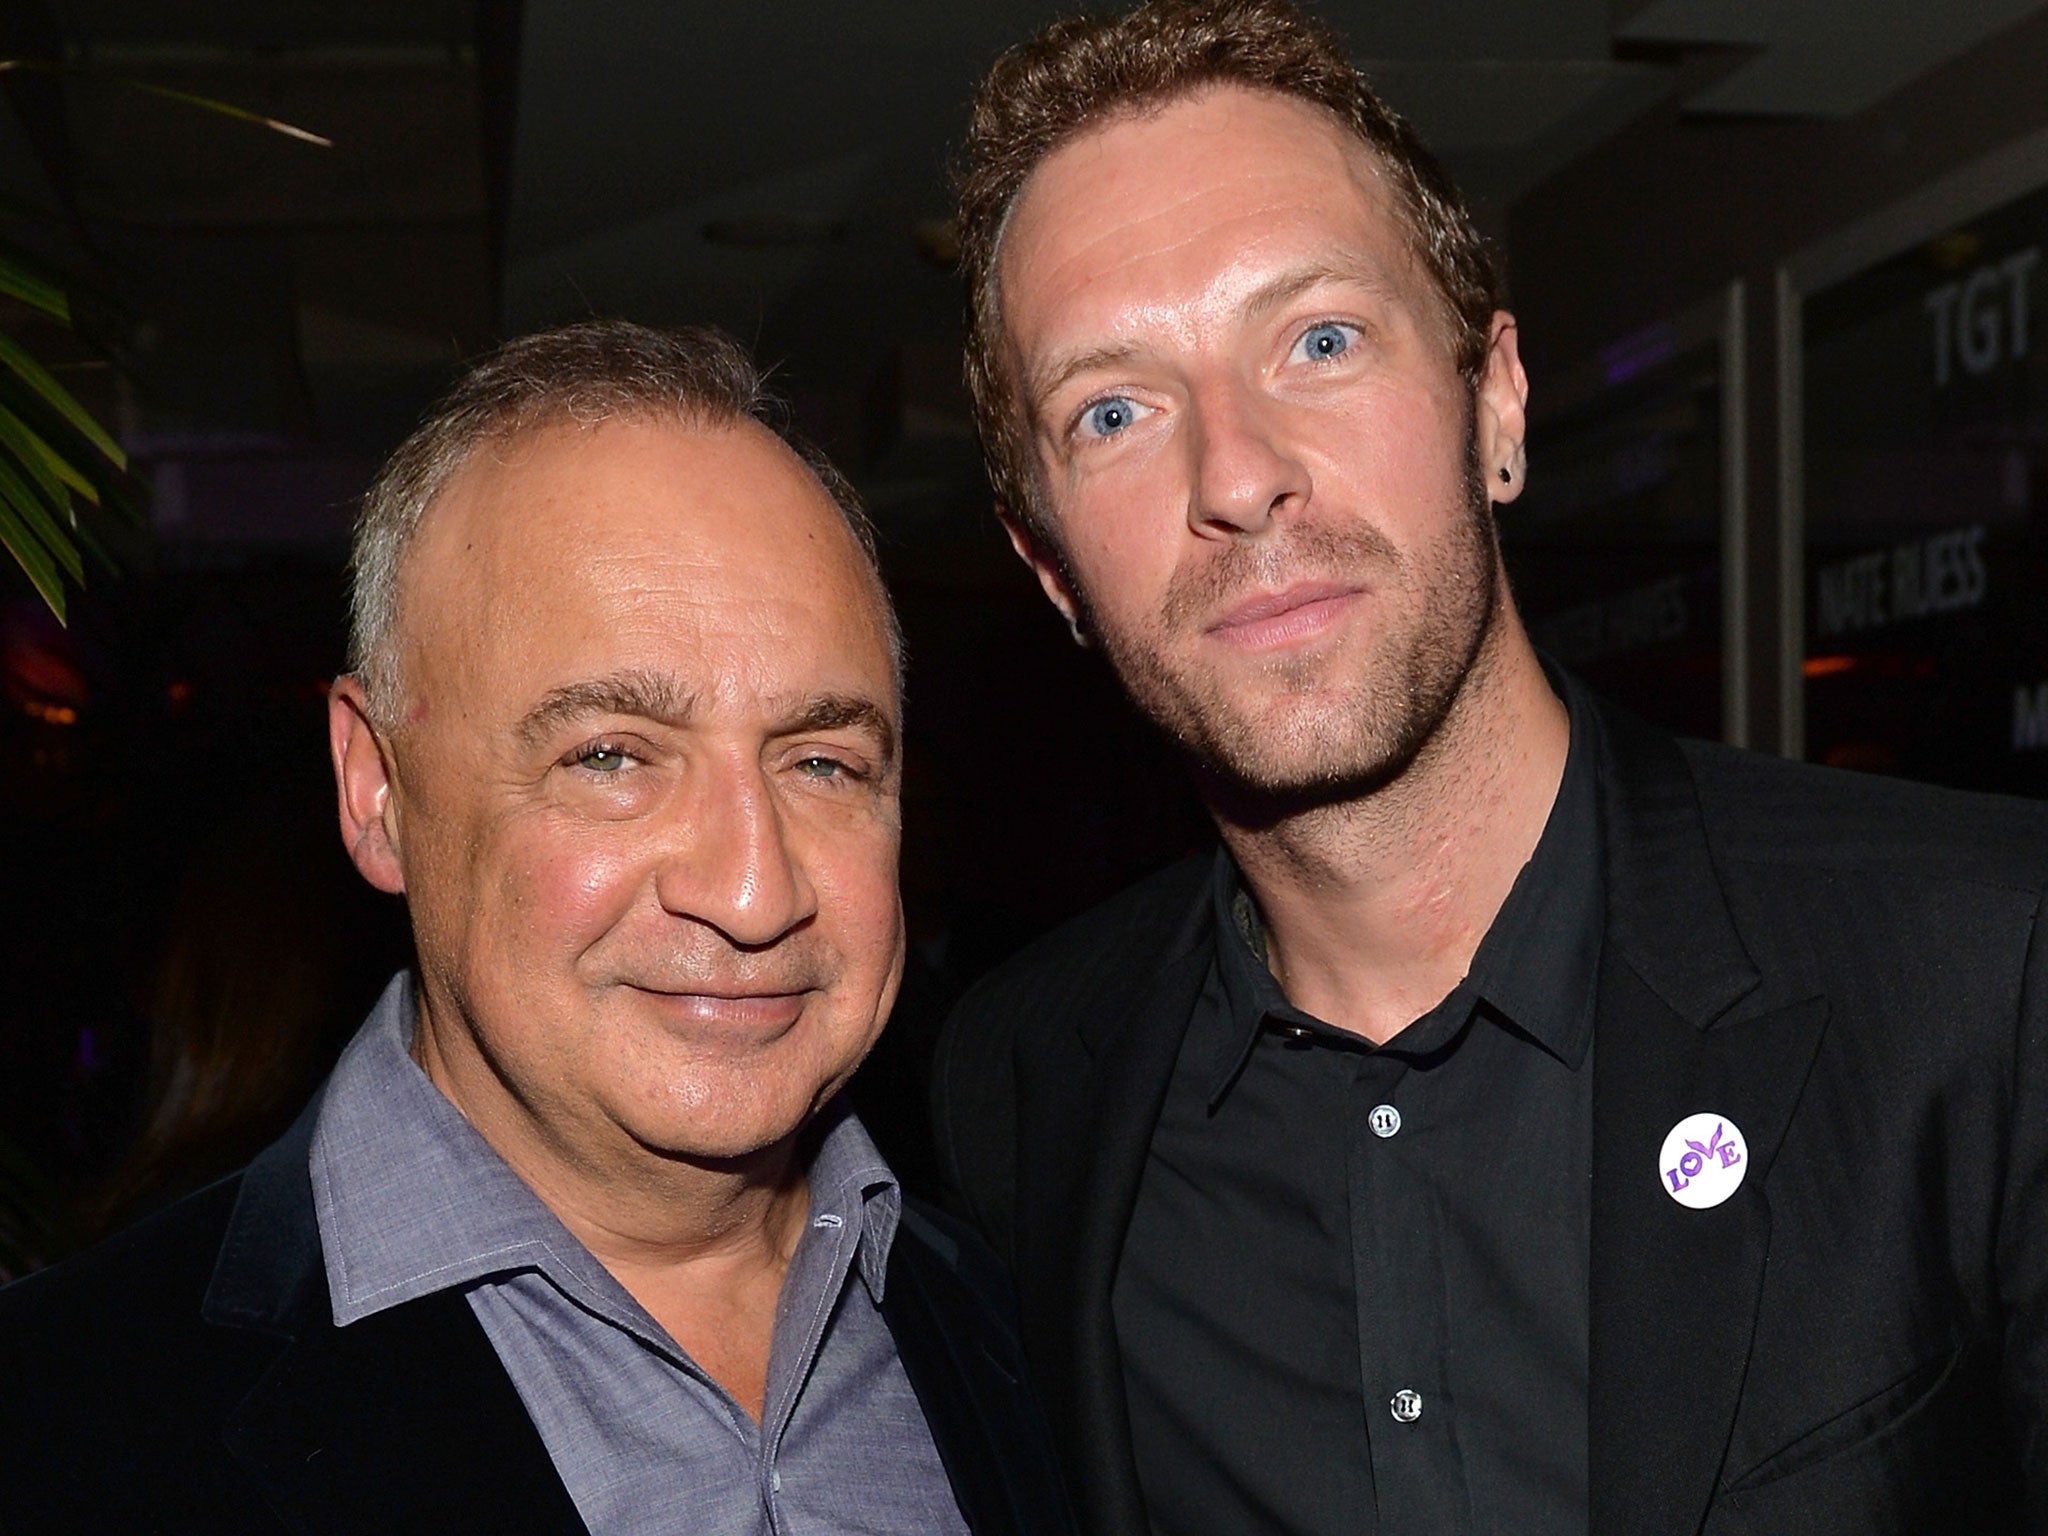 Len Blavatnik and musician Chris Martin of Coldplay attend the Warner Music Group annual GRAMMY celebration on January 26, 2014 in Los Angeles, California